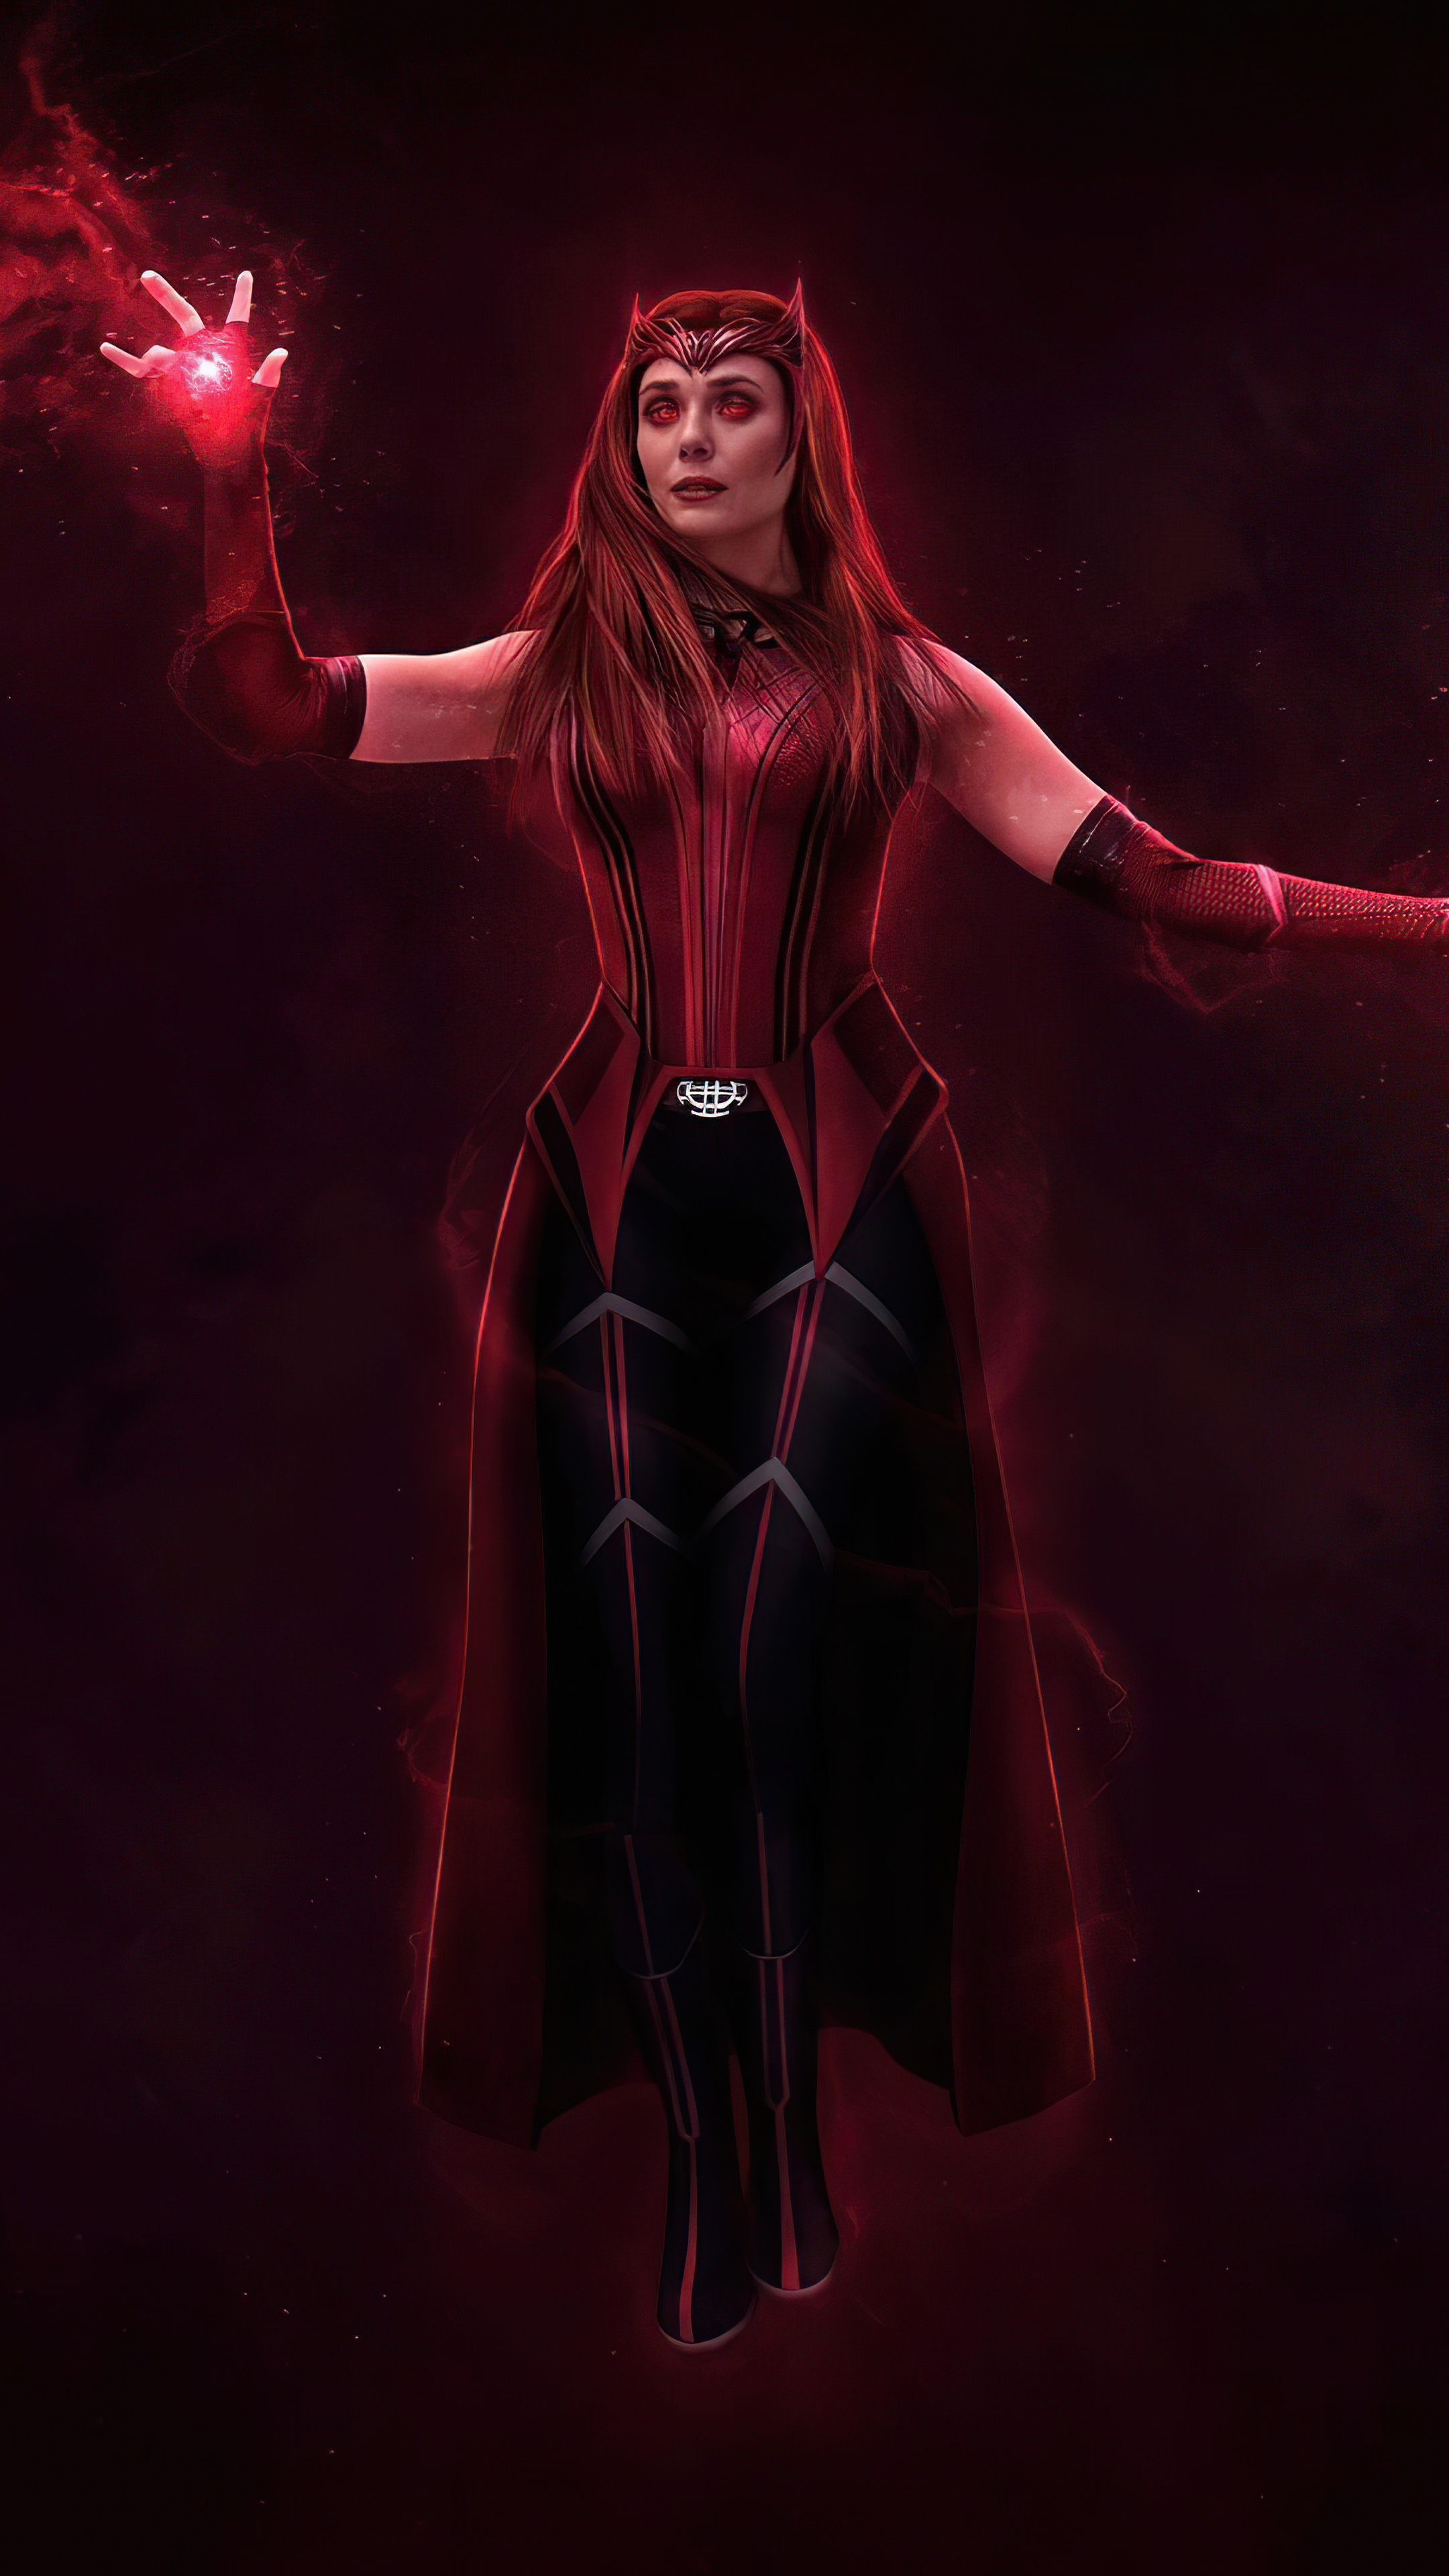 Scarlet Witch, Switched back wallpaper, Sony Xperia X wallpapers, Premium quality, 2160x3840 4K Handy